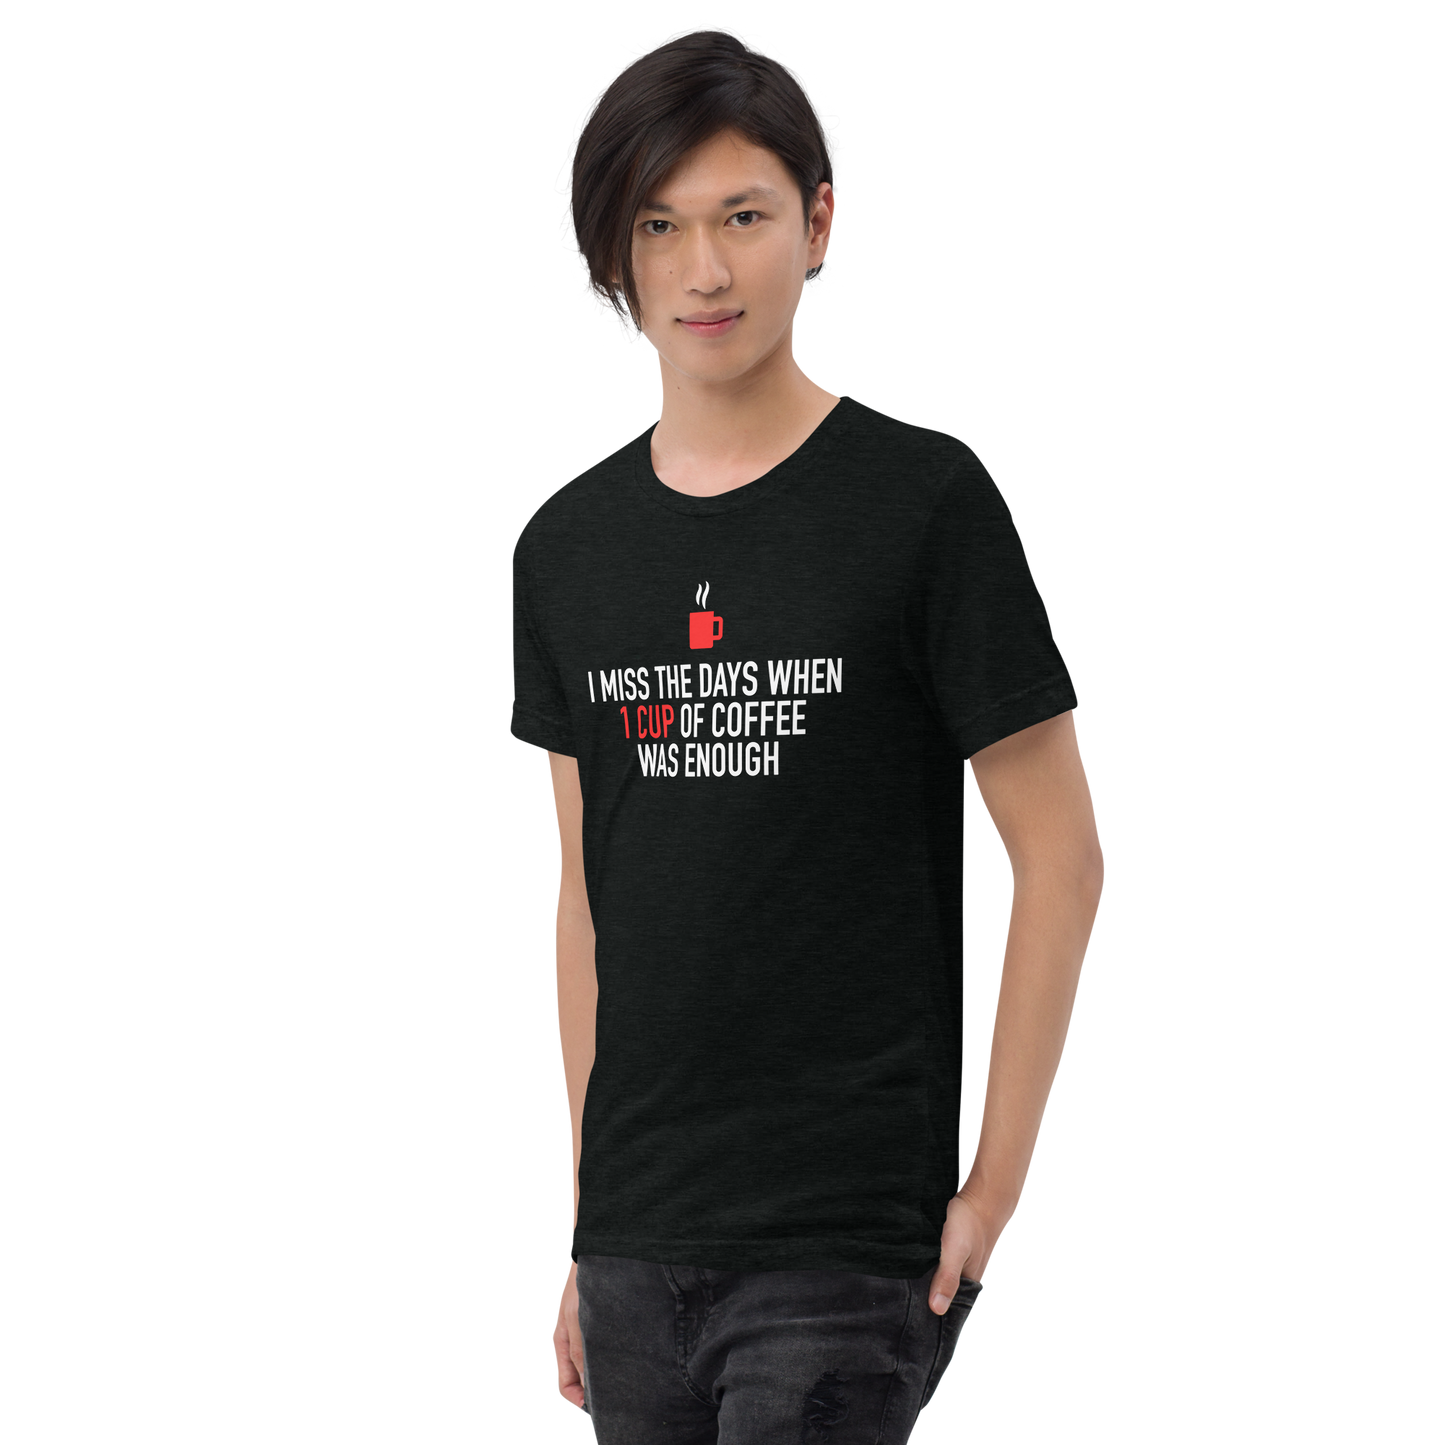 COFFEE - I miss the days when 1 cup of coffee was enough Funny T-Shirt